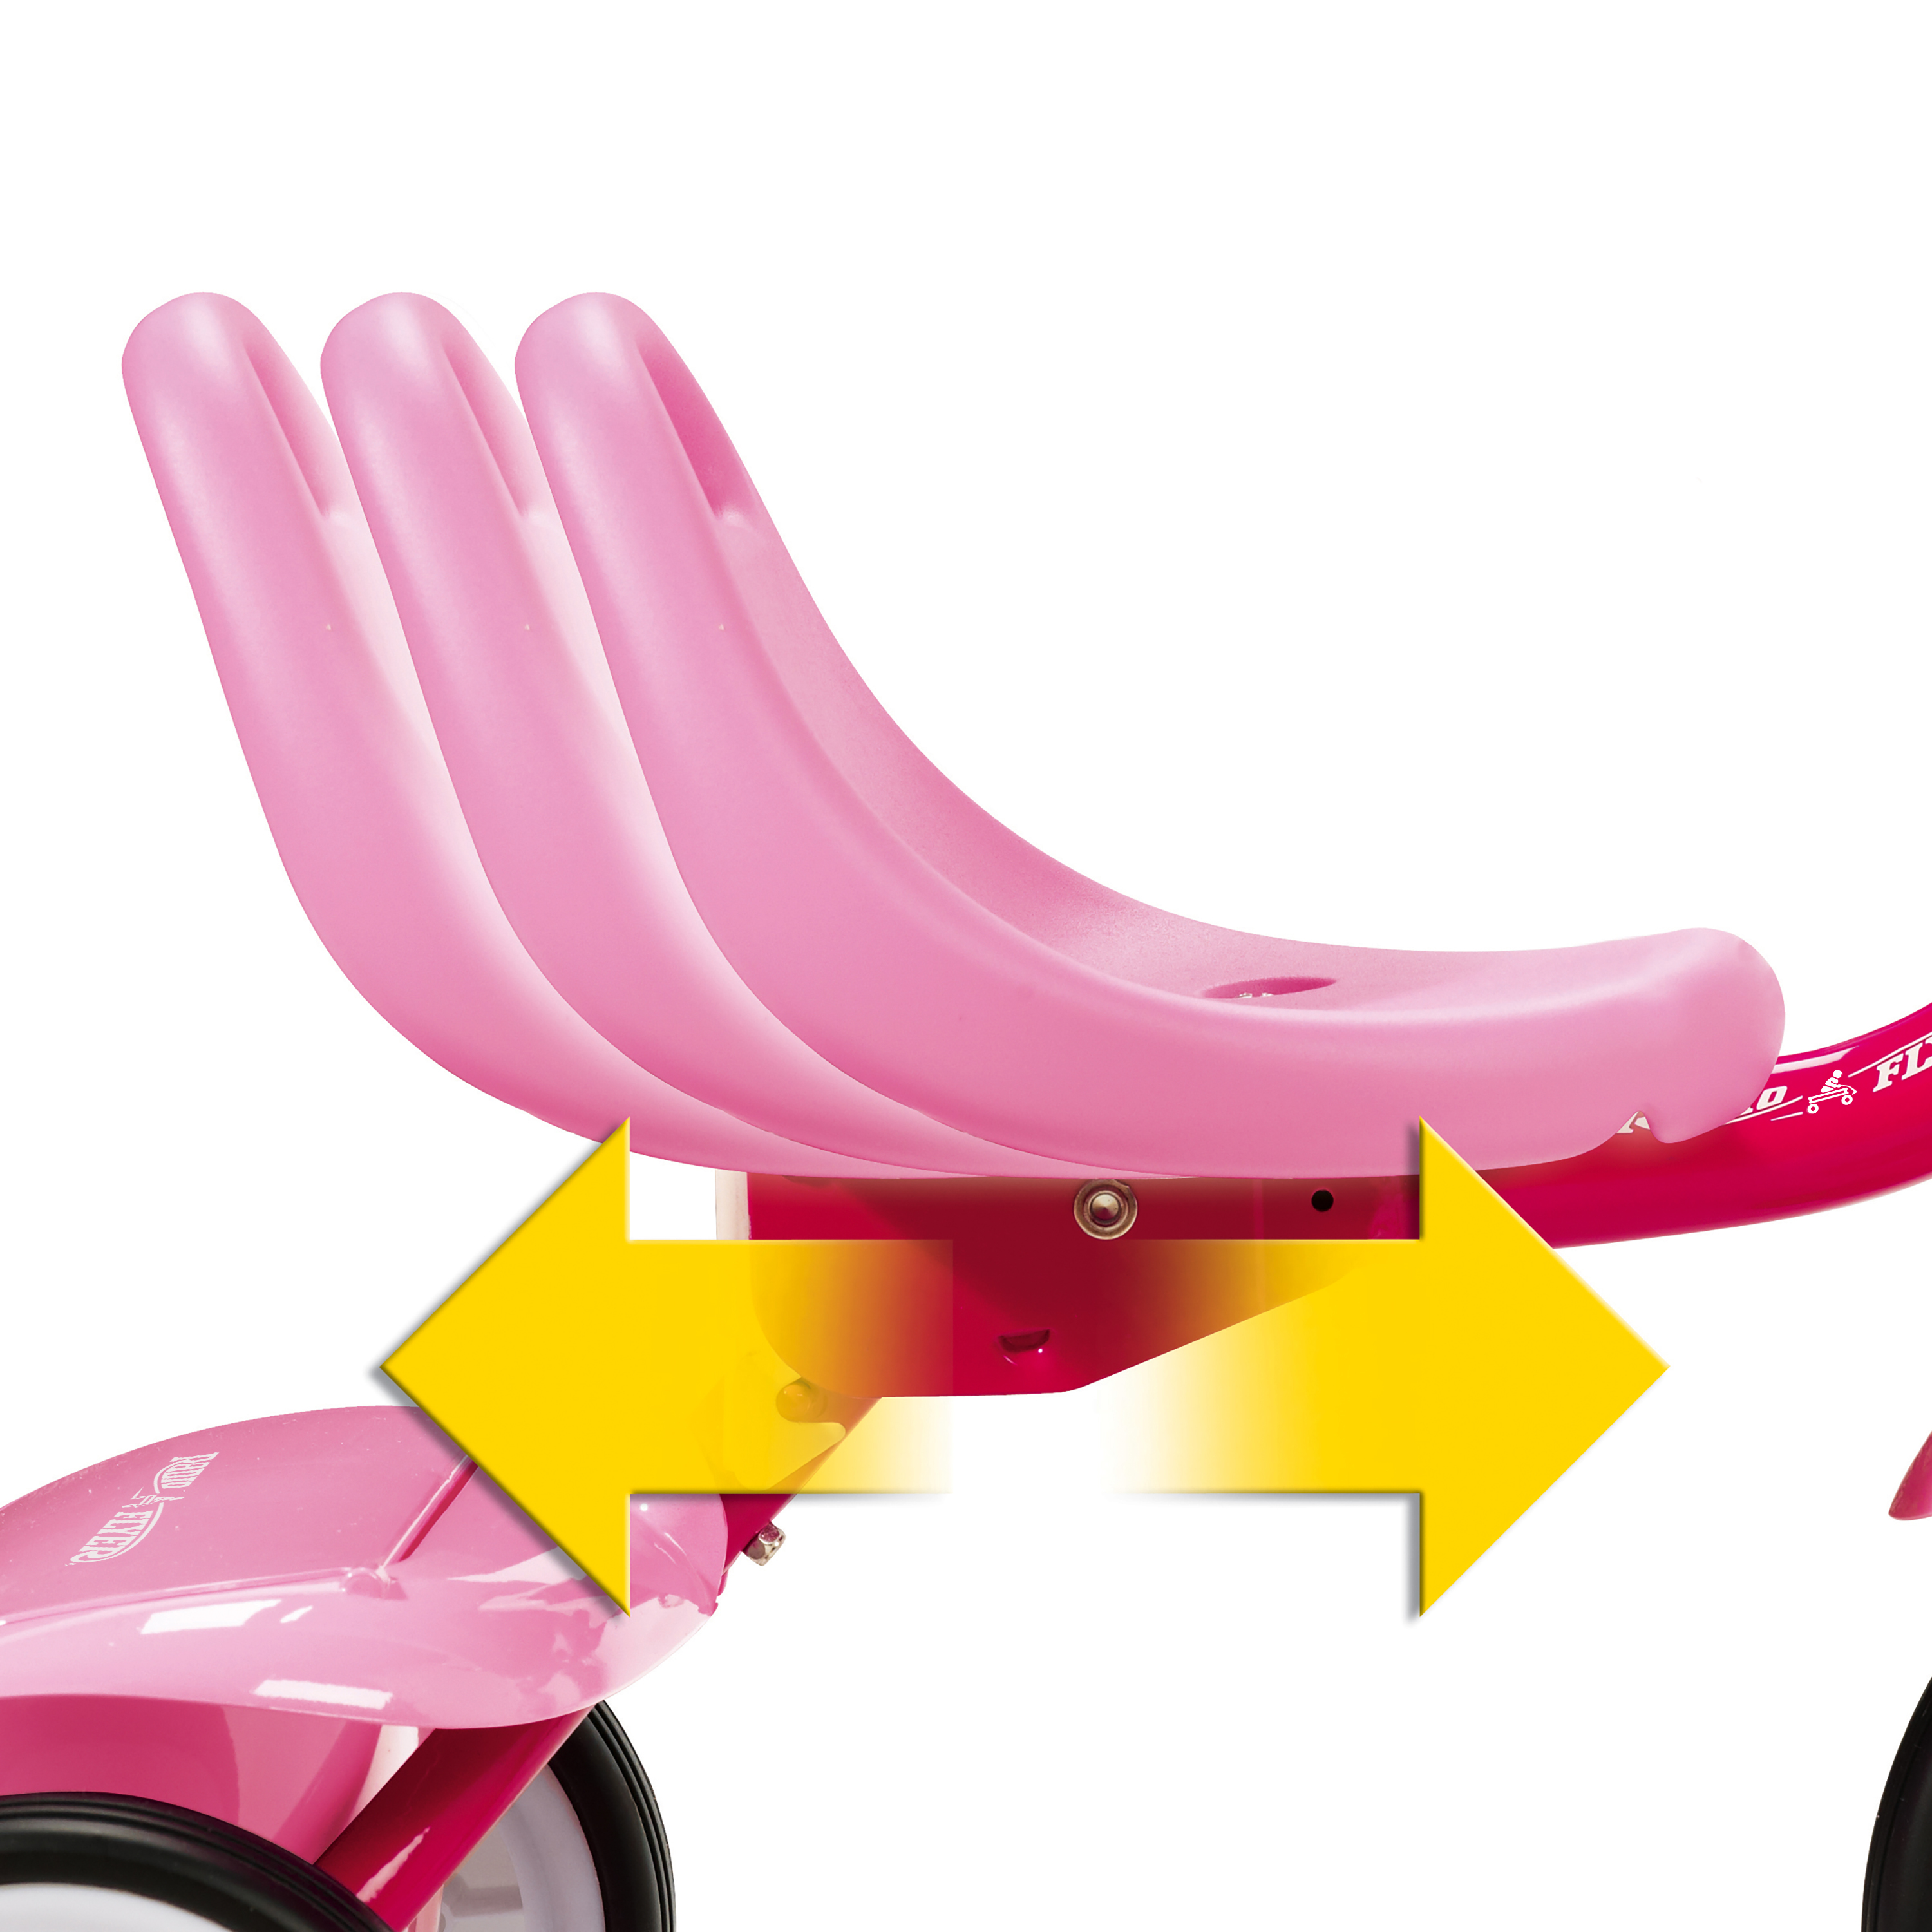 Radio Flyer, Ready to Ride Folding Trike, Fully Assembled, Pink, Beginner Tricycle for Kids, Girls - image 5 of 10